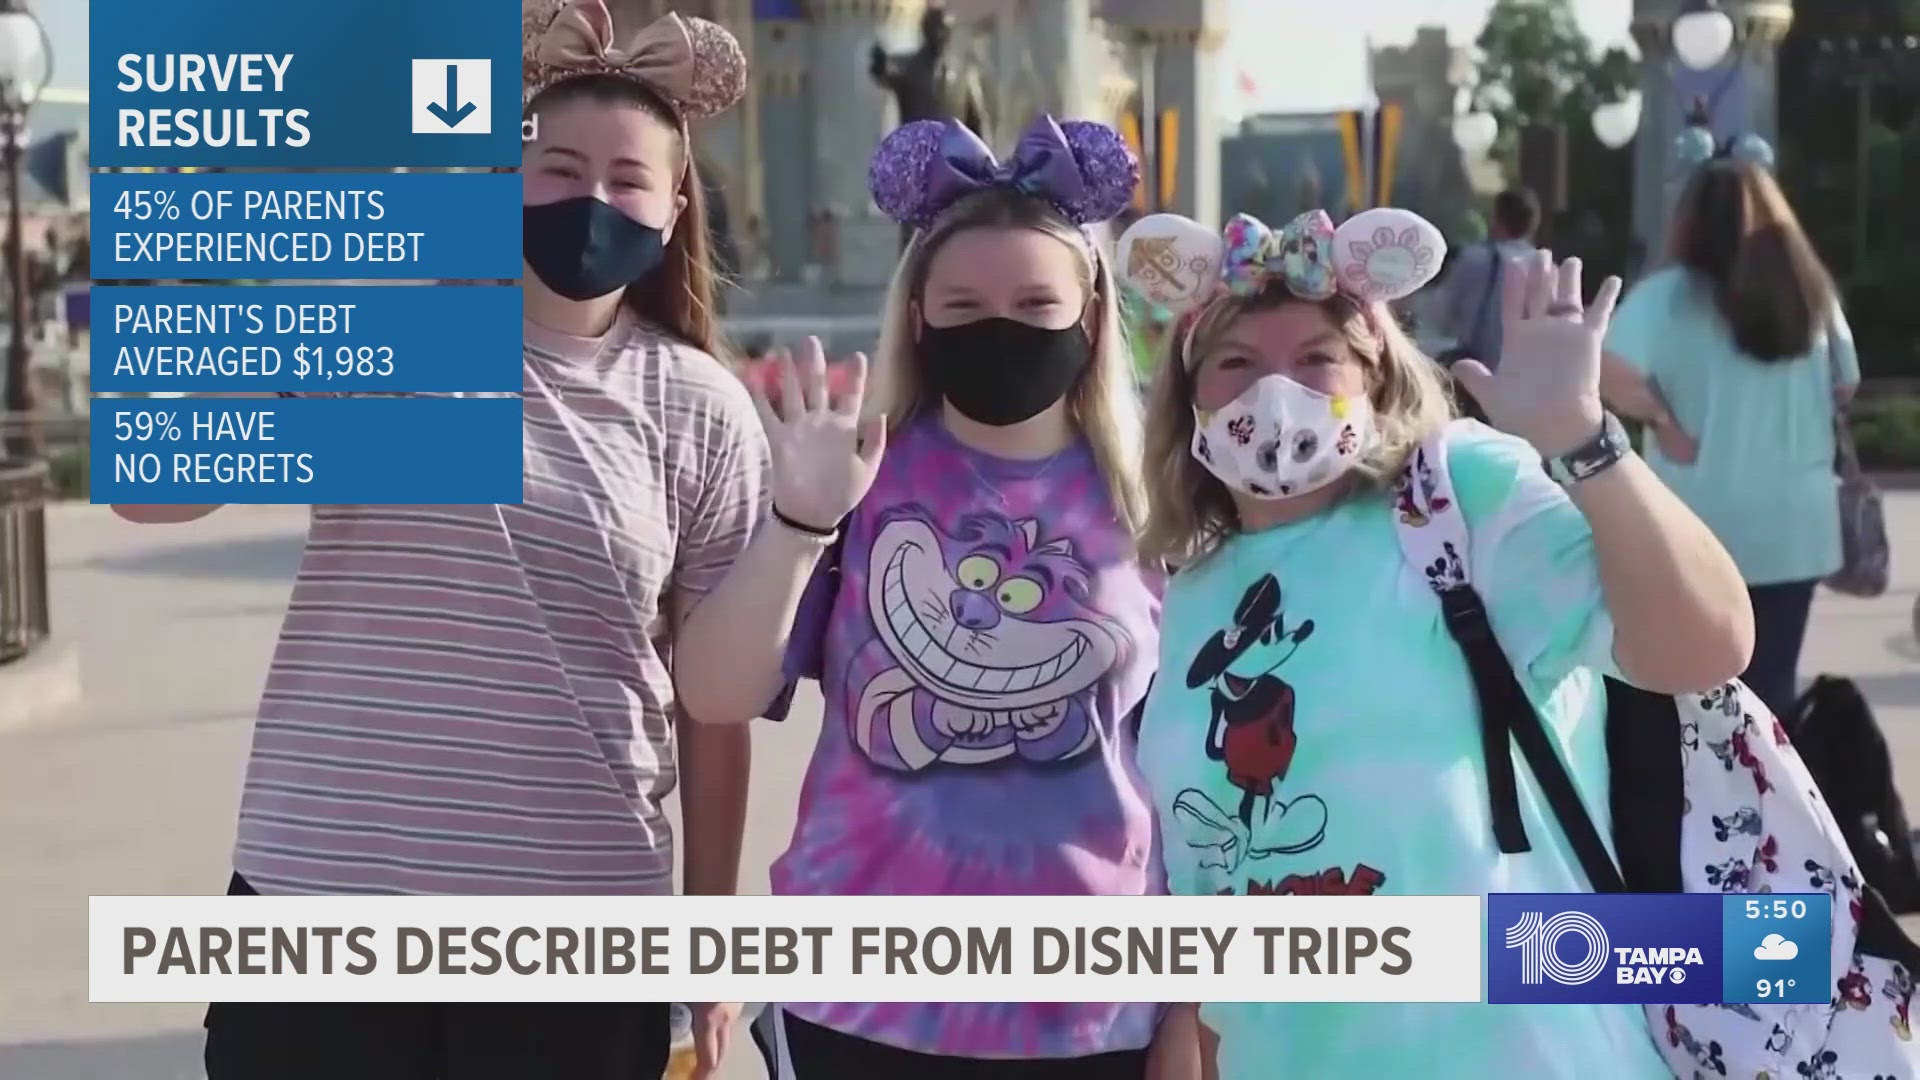 Loan company LendingTree recently surveyed 2,000 people to find that 24% of Disney-goers have gone into debt for a trip to the theme park.